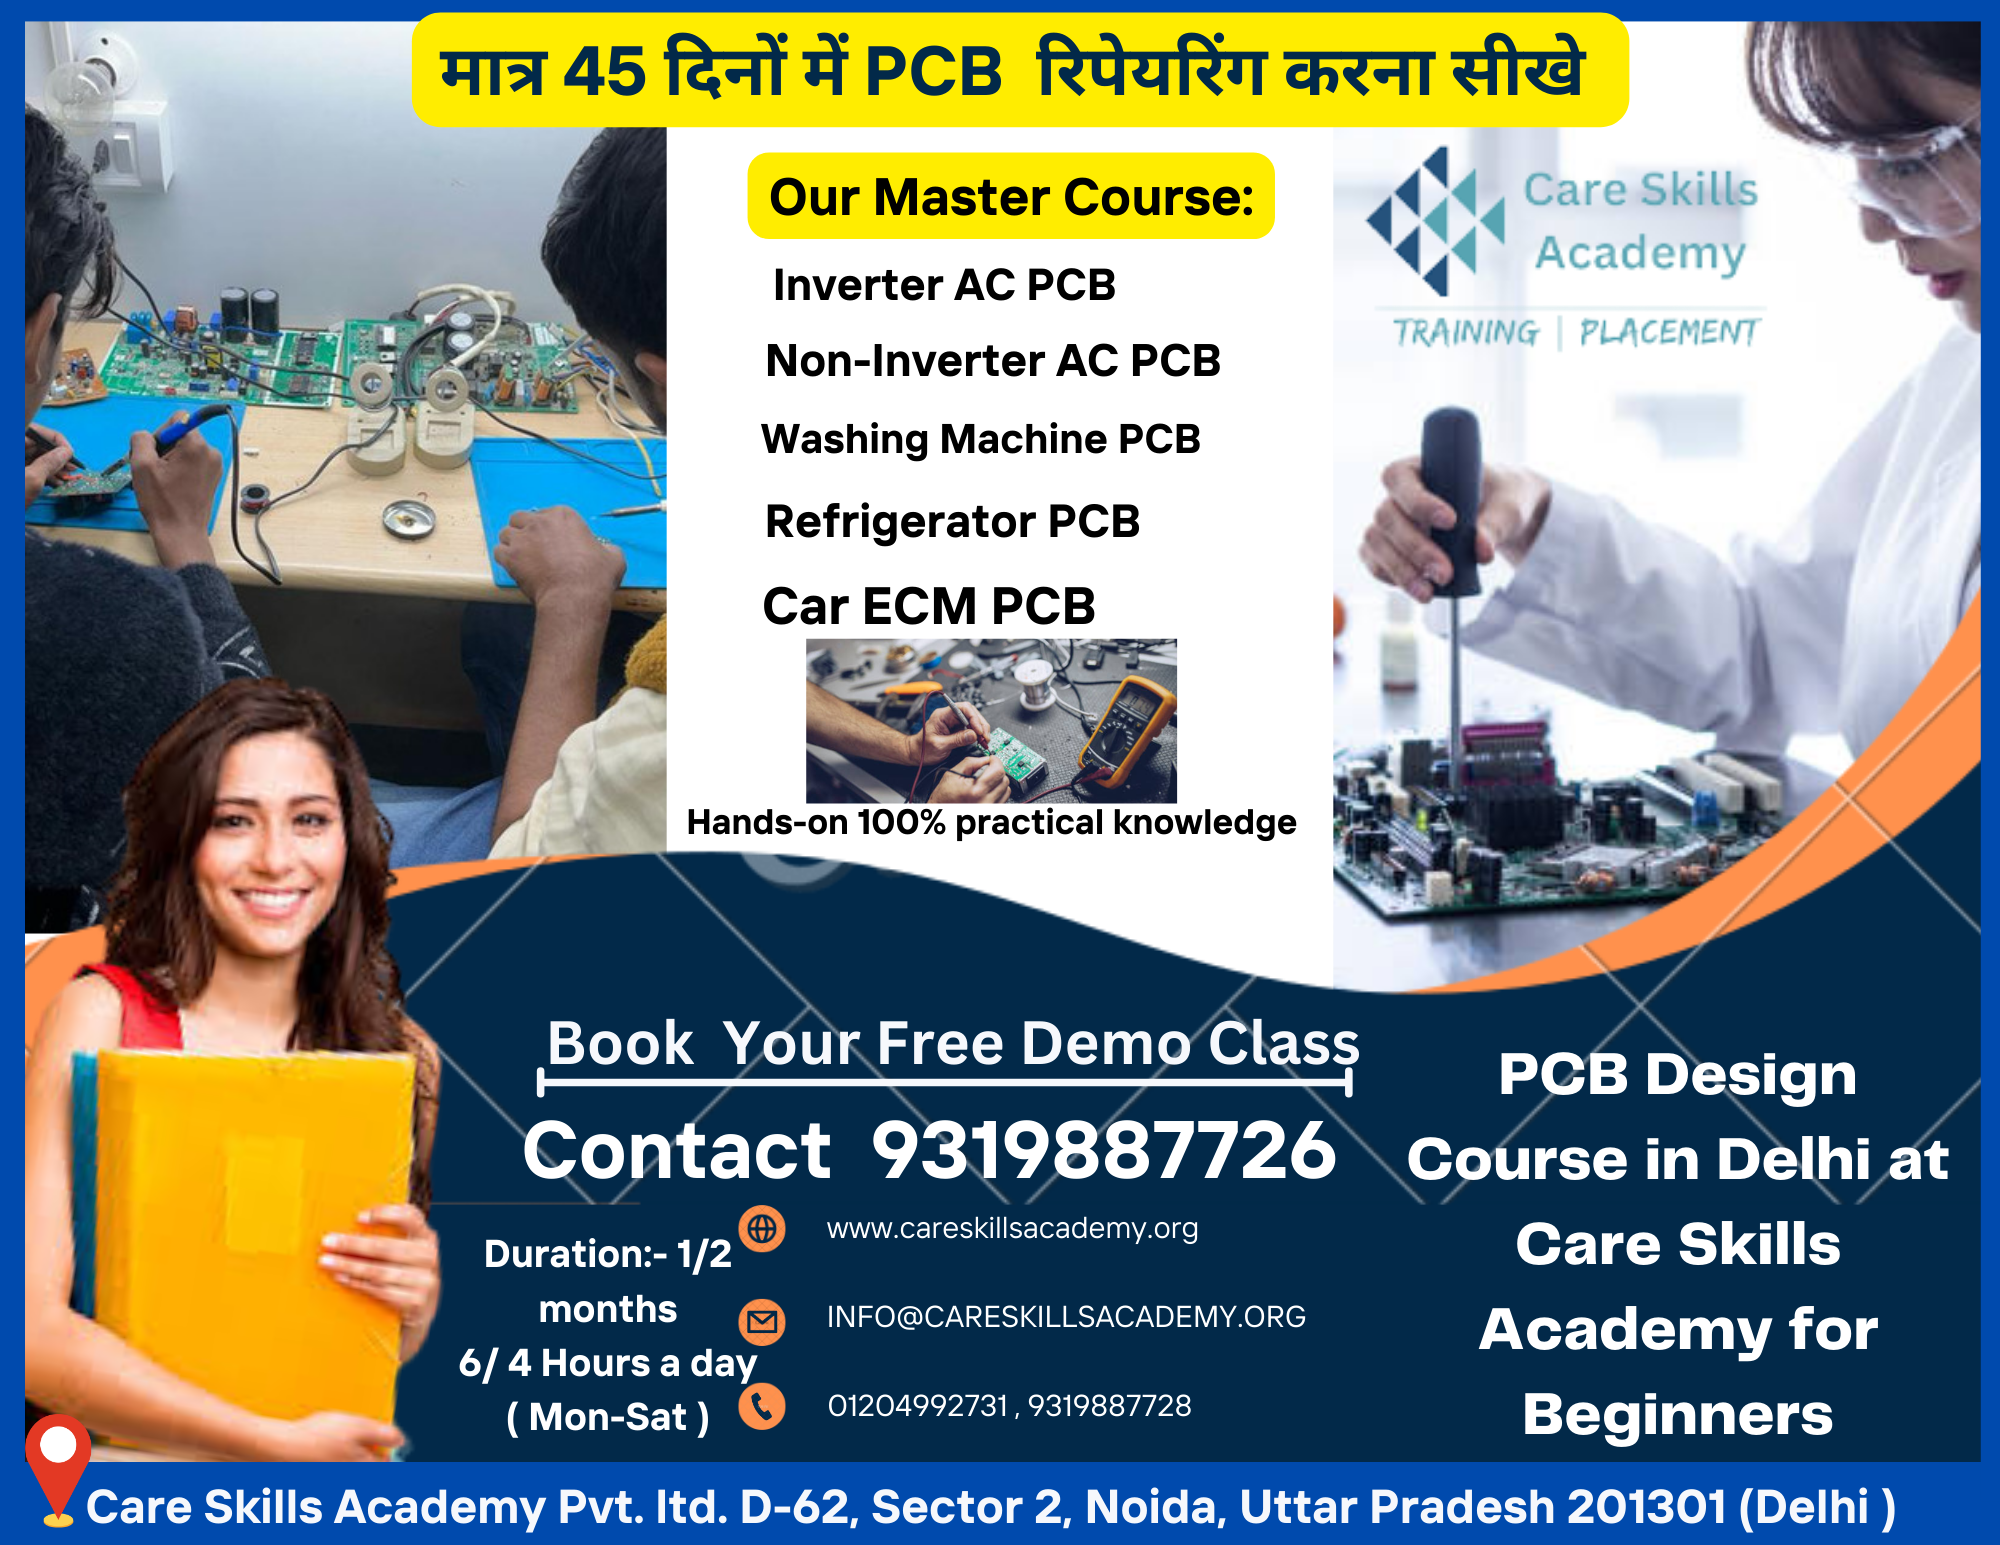 PCB Design Course in Delhi at Care Skills Academy for Beginners